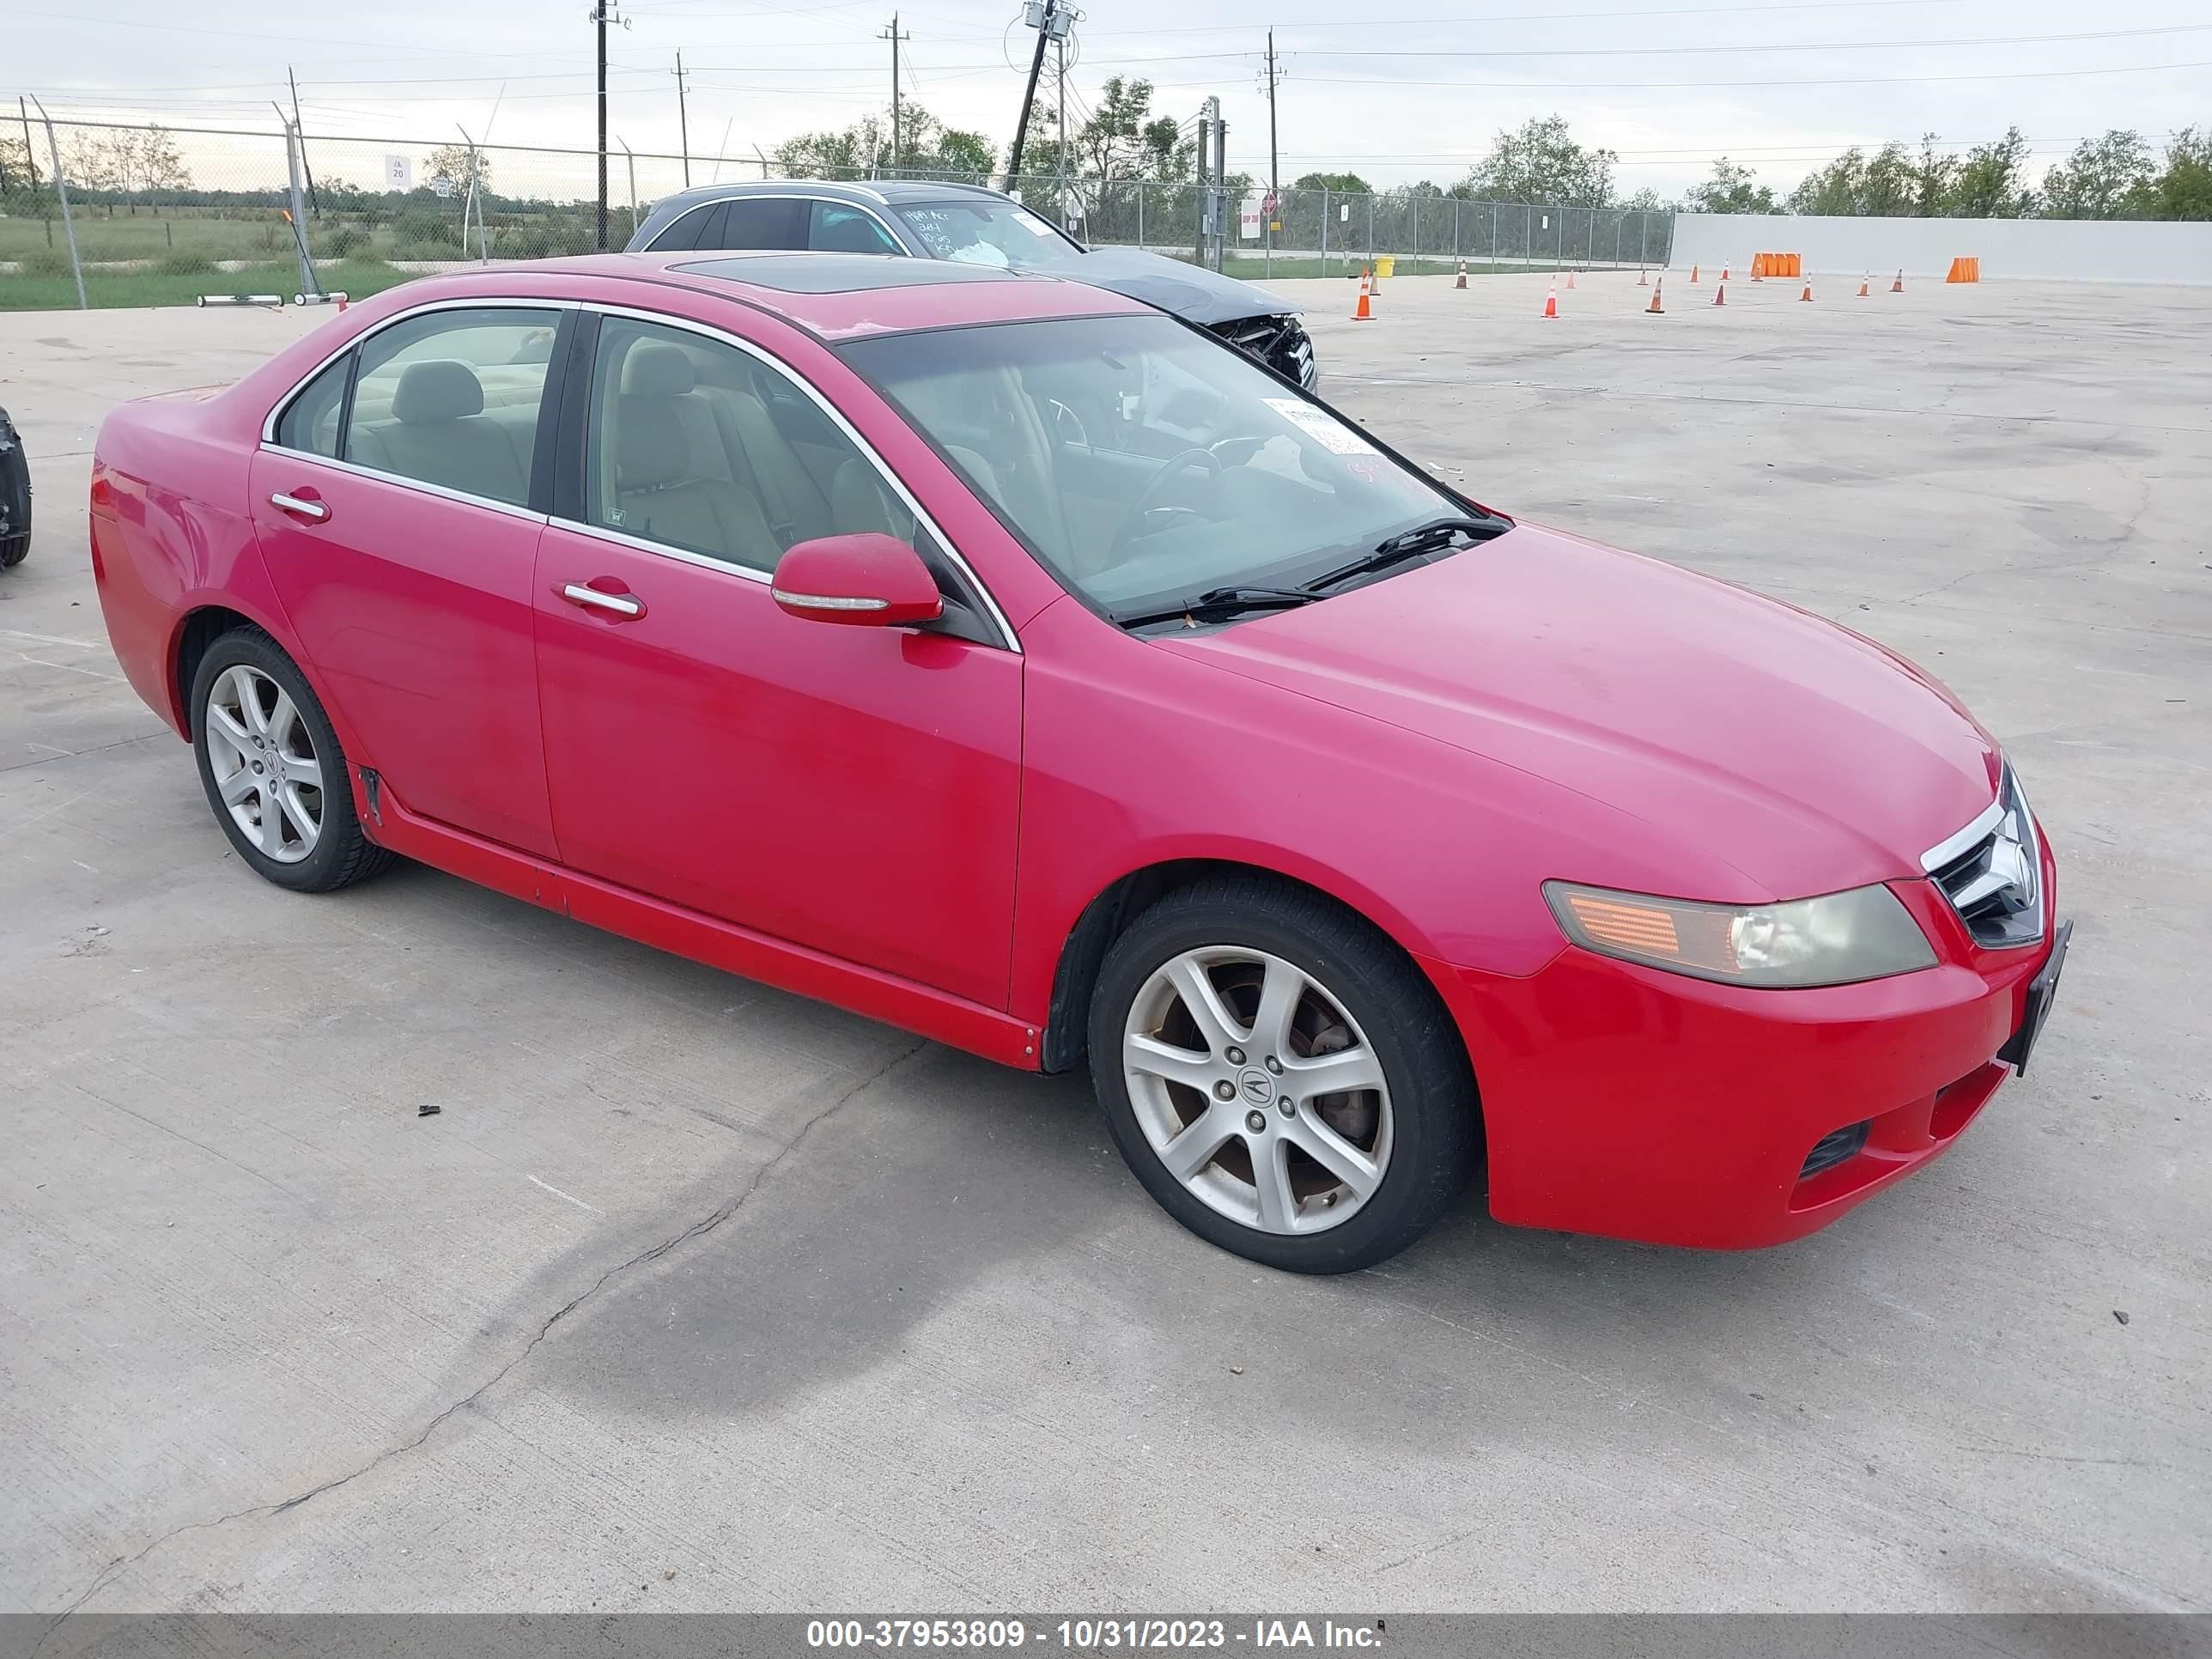 acura tsx 2004 jh4cl96824c038242